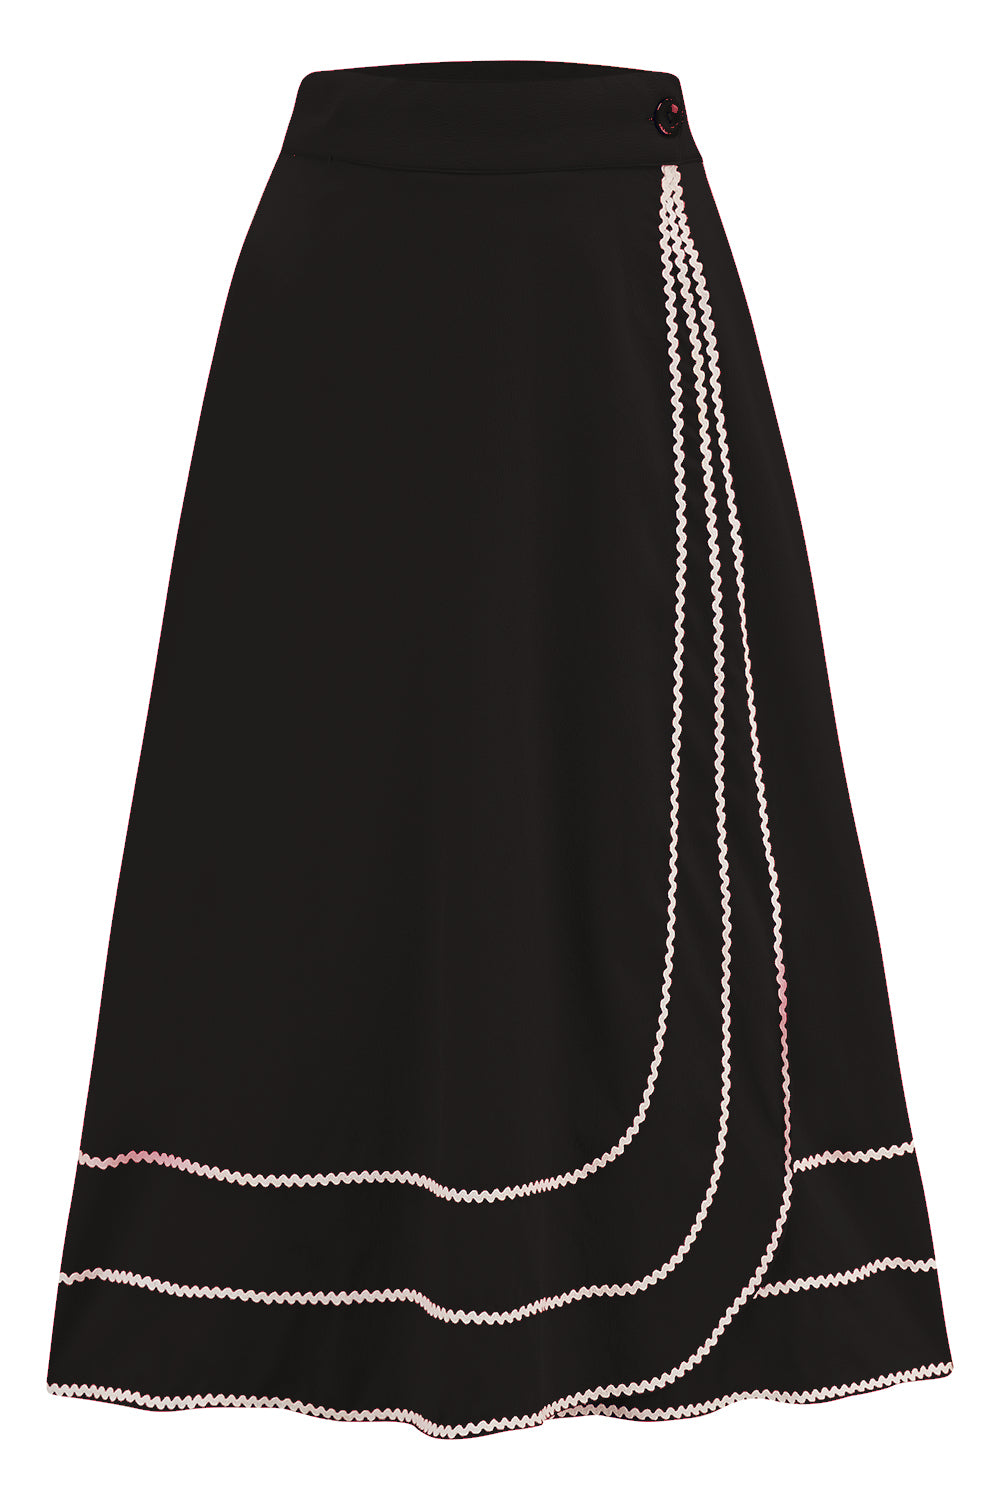 The "Glynis" Wrap Around Circle Skirt with Pockets in Black with Ivory Ric Rac, True & Authentic 1950s Vintage Style